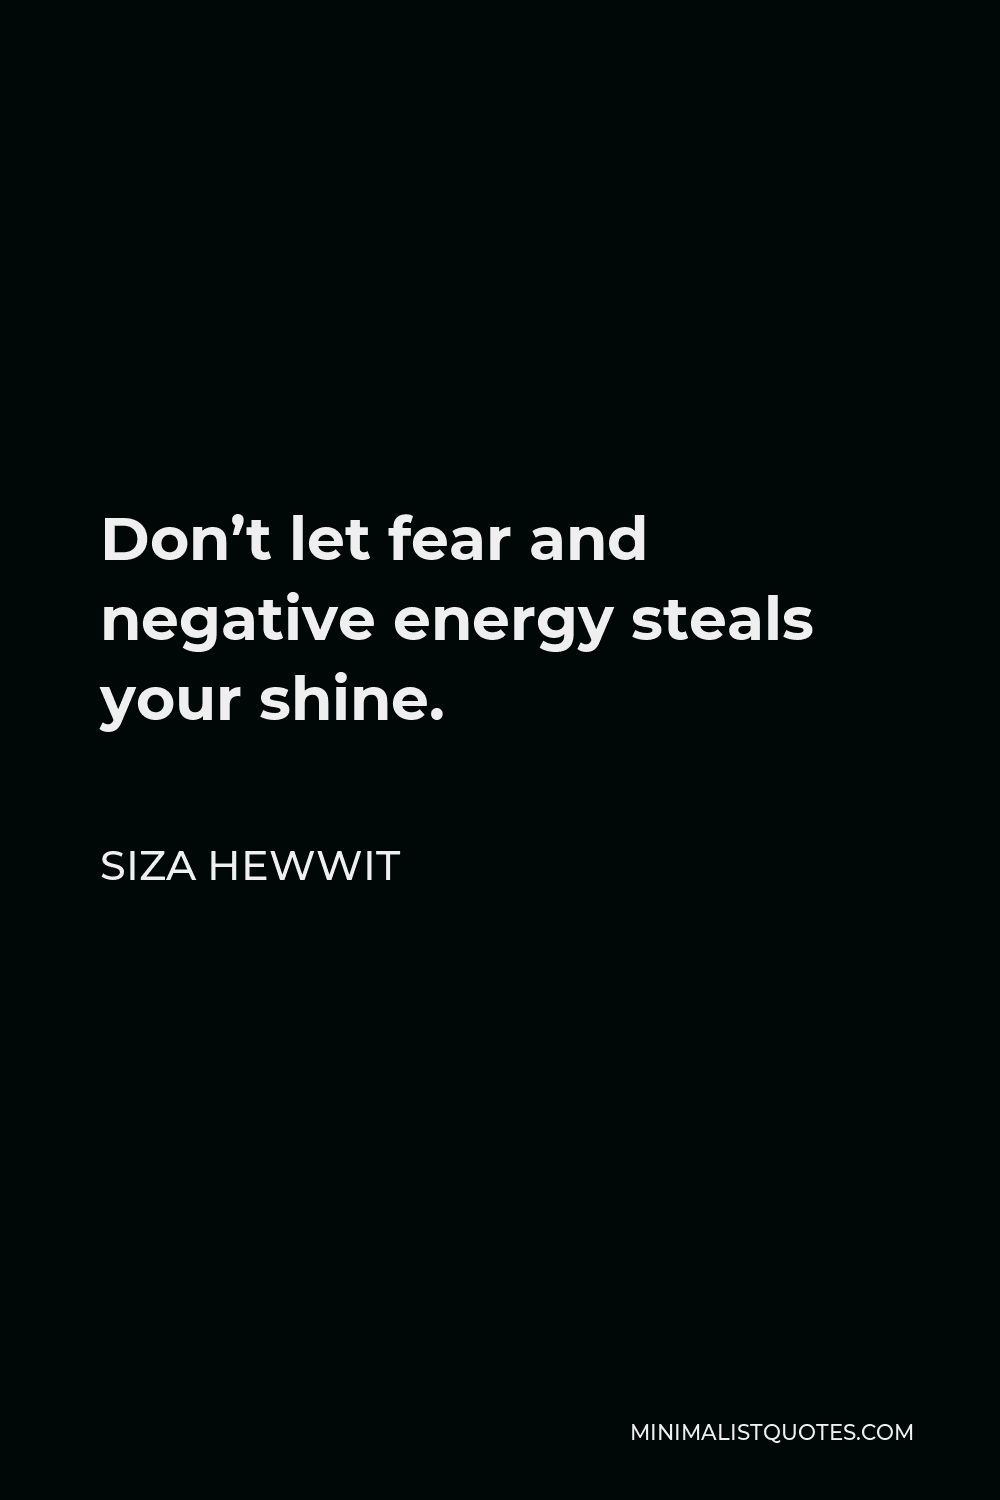 Siza Hewwit Quote - Don’t let fear and negative energy steals your shine.